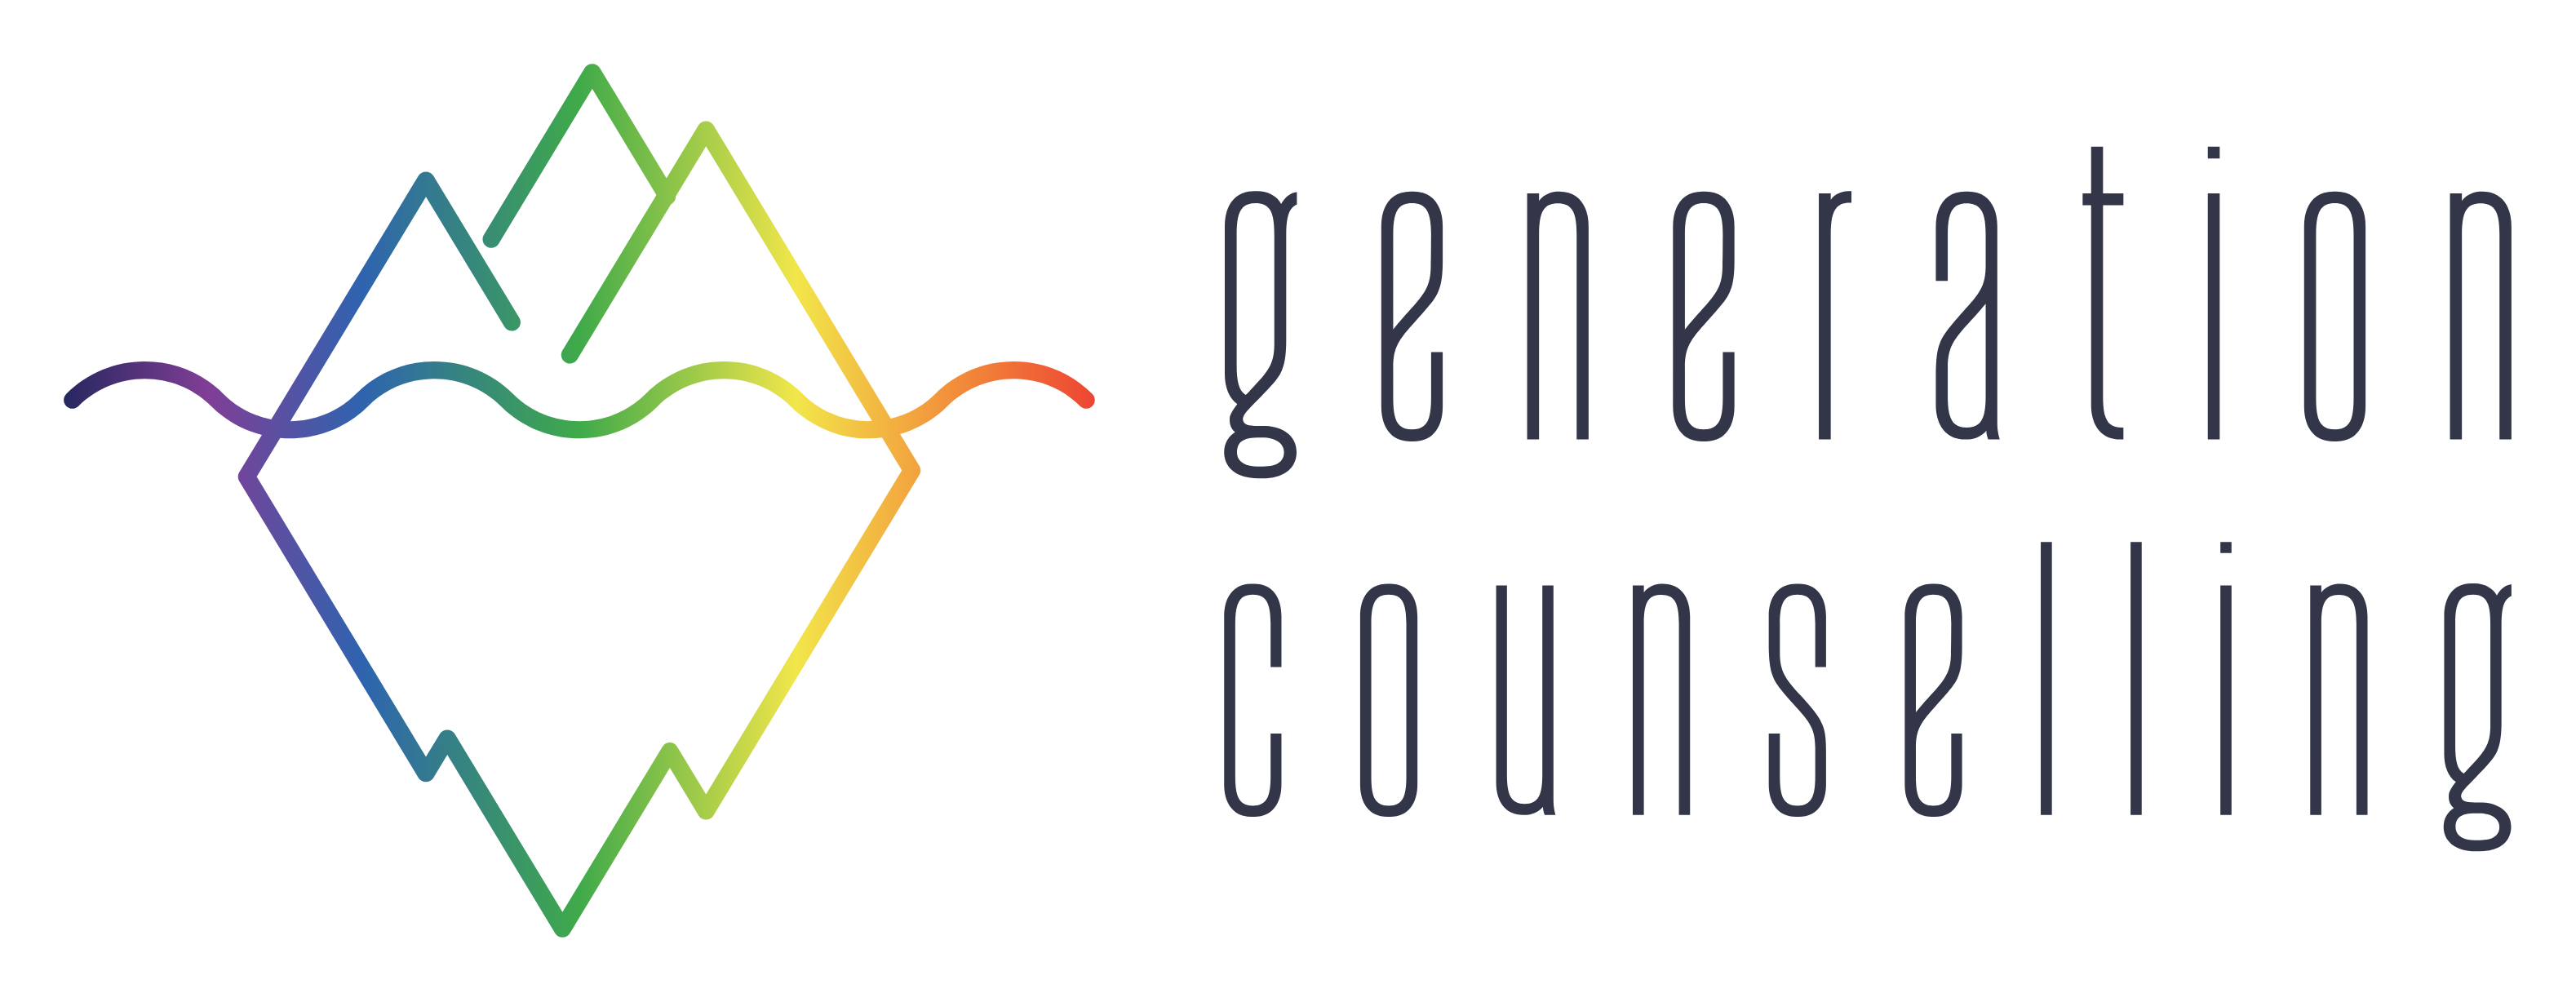 Generation Counselling - Youth & Adult Clinical Counselling in Langley